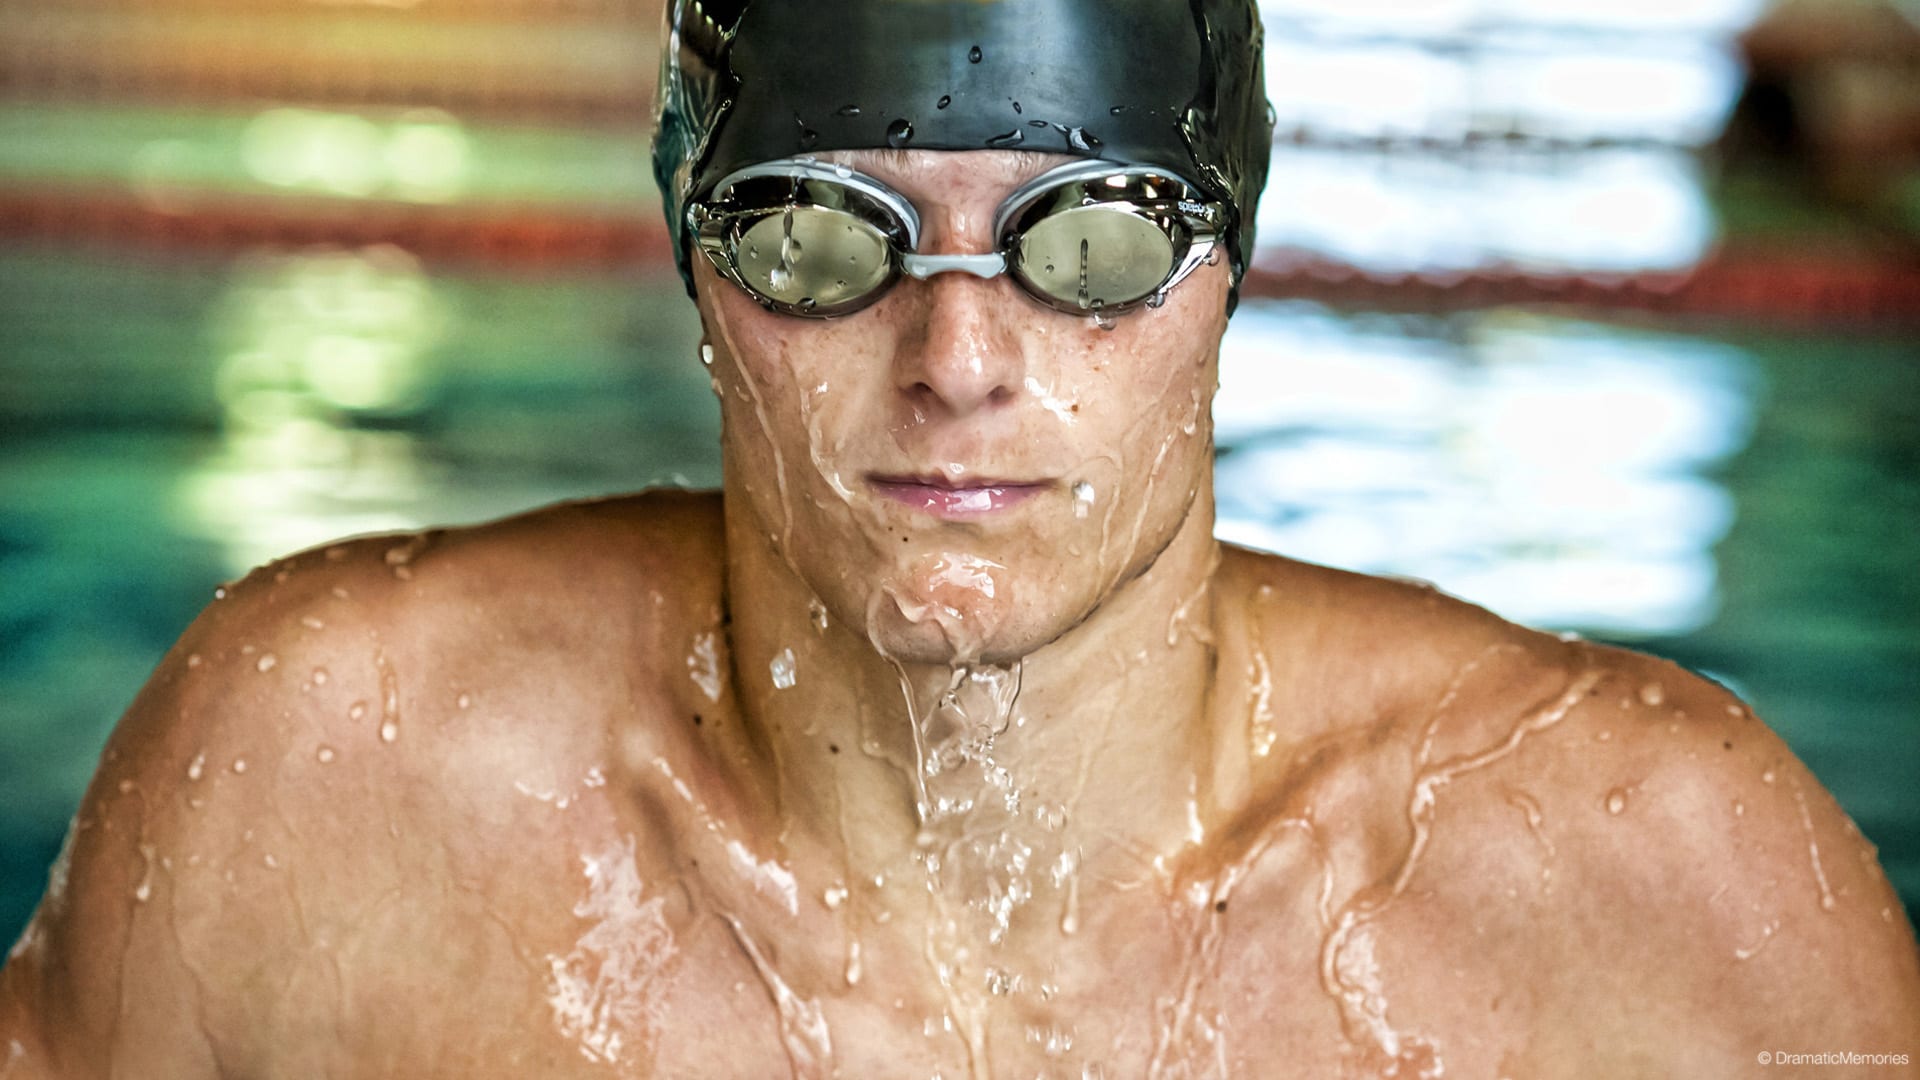 high school swimmer coming out of the pool with goggles on